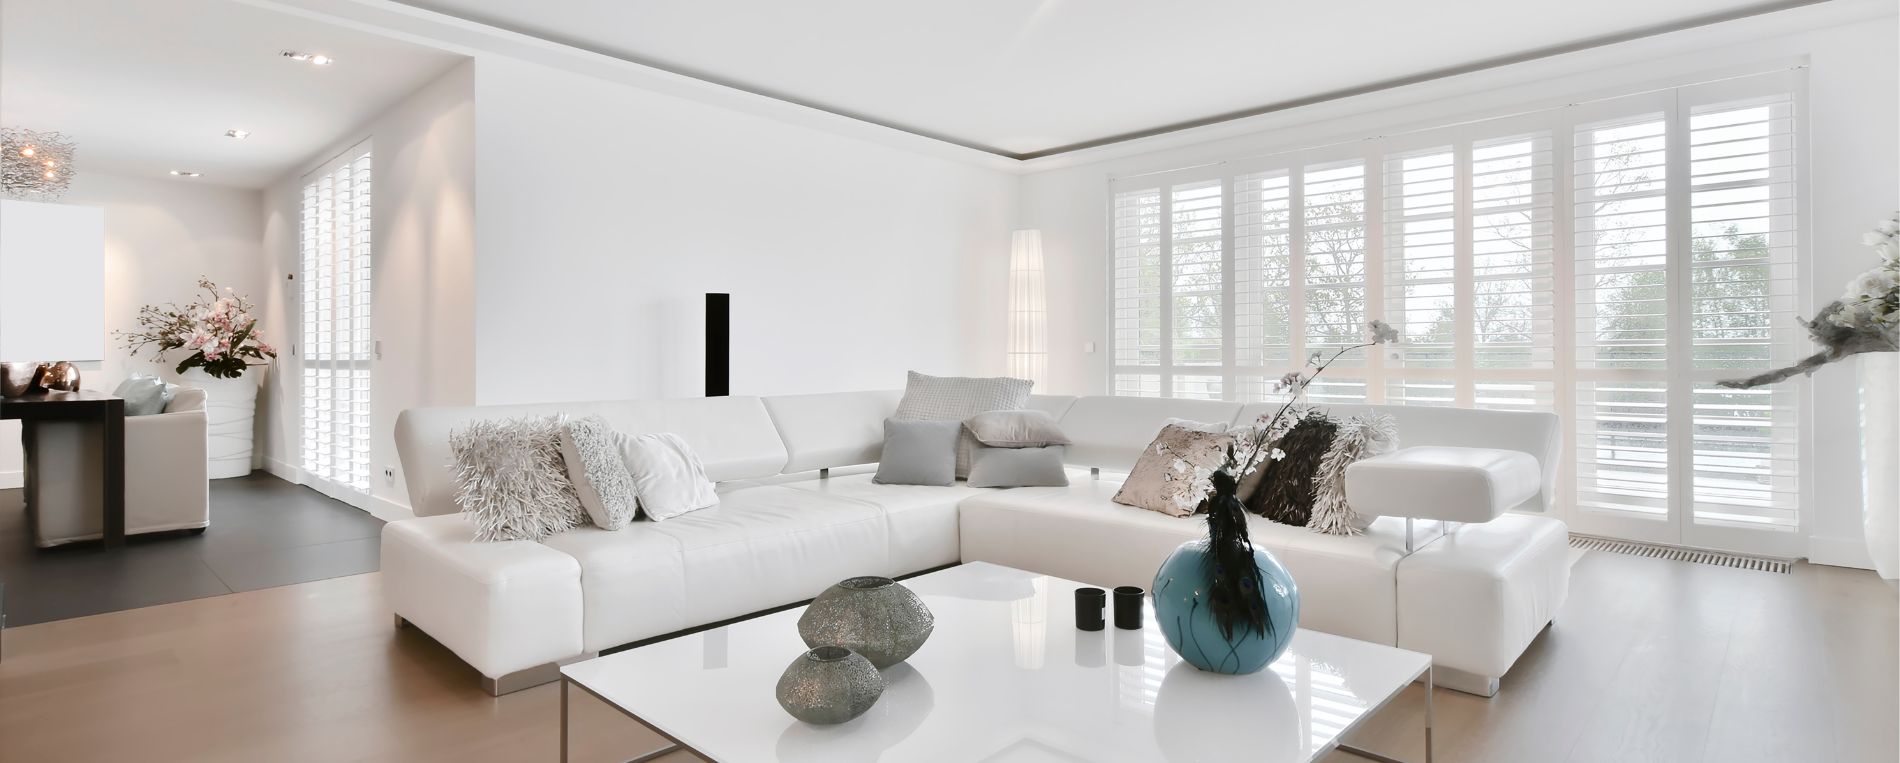 A view to a bright living room space with white plantation shutters